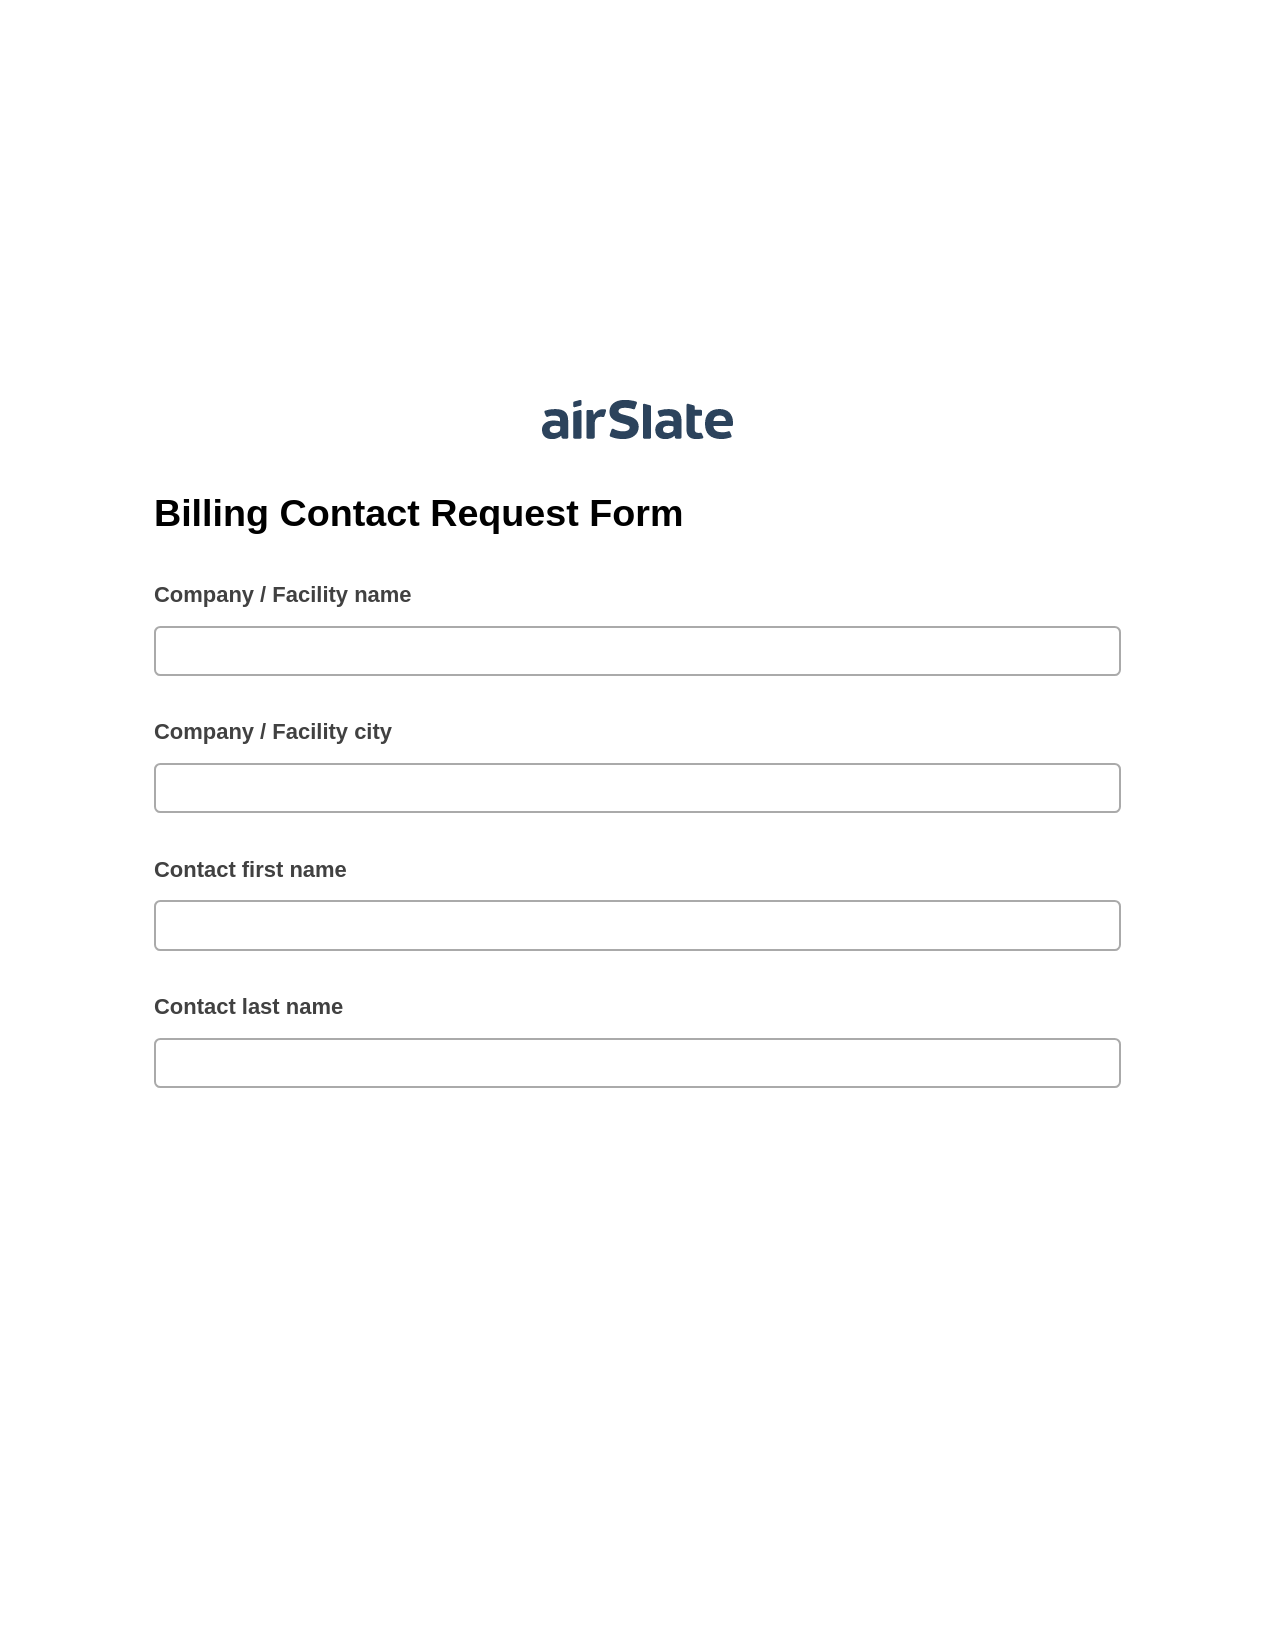 Billing Contact Request Form Pre-fill Dropdowns from Google Sheet Bot, Revoke Access Bot, Archive to SharePoint Folder Bot